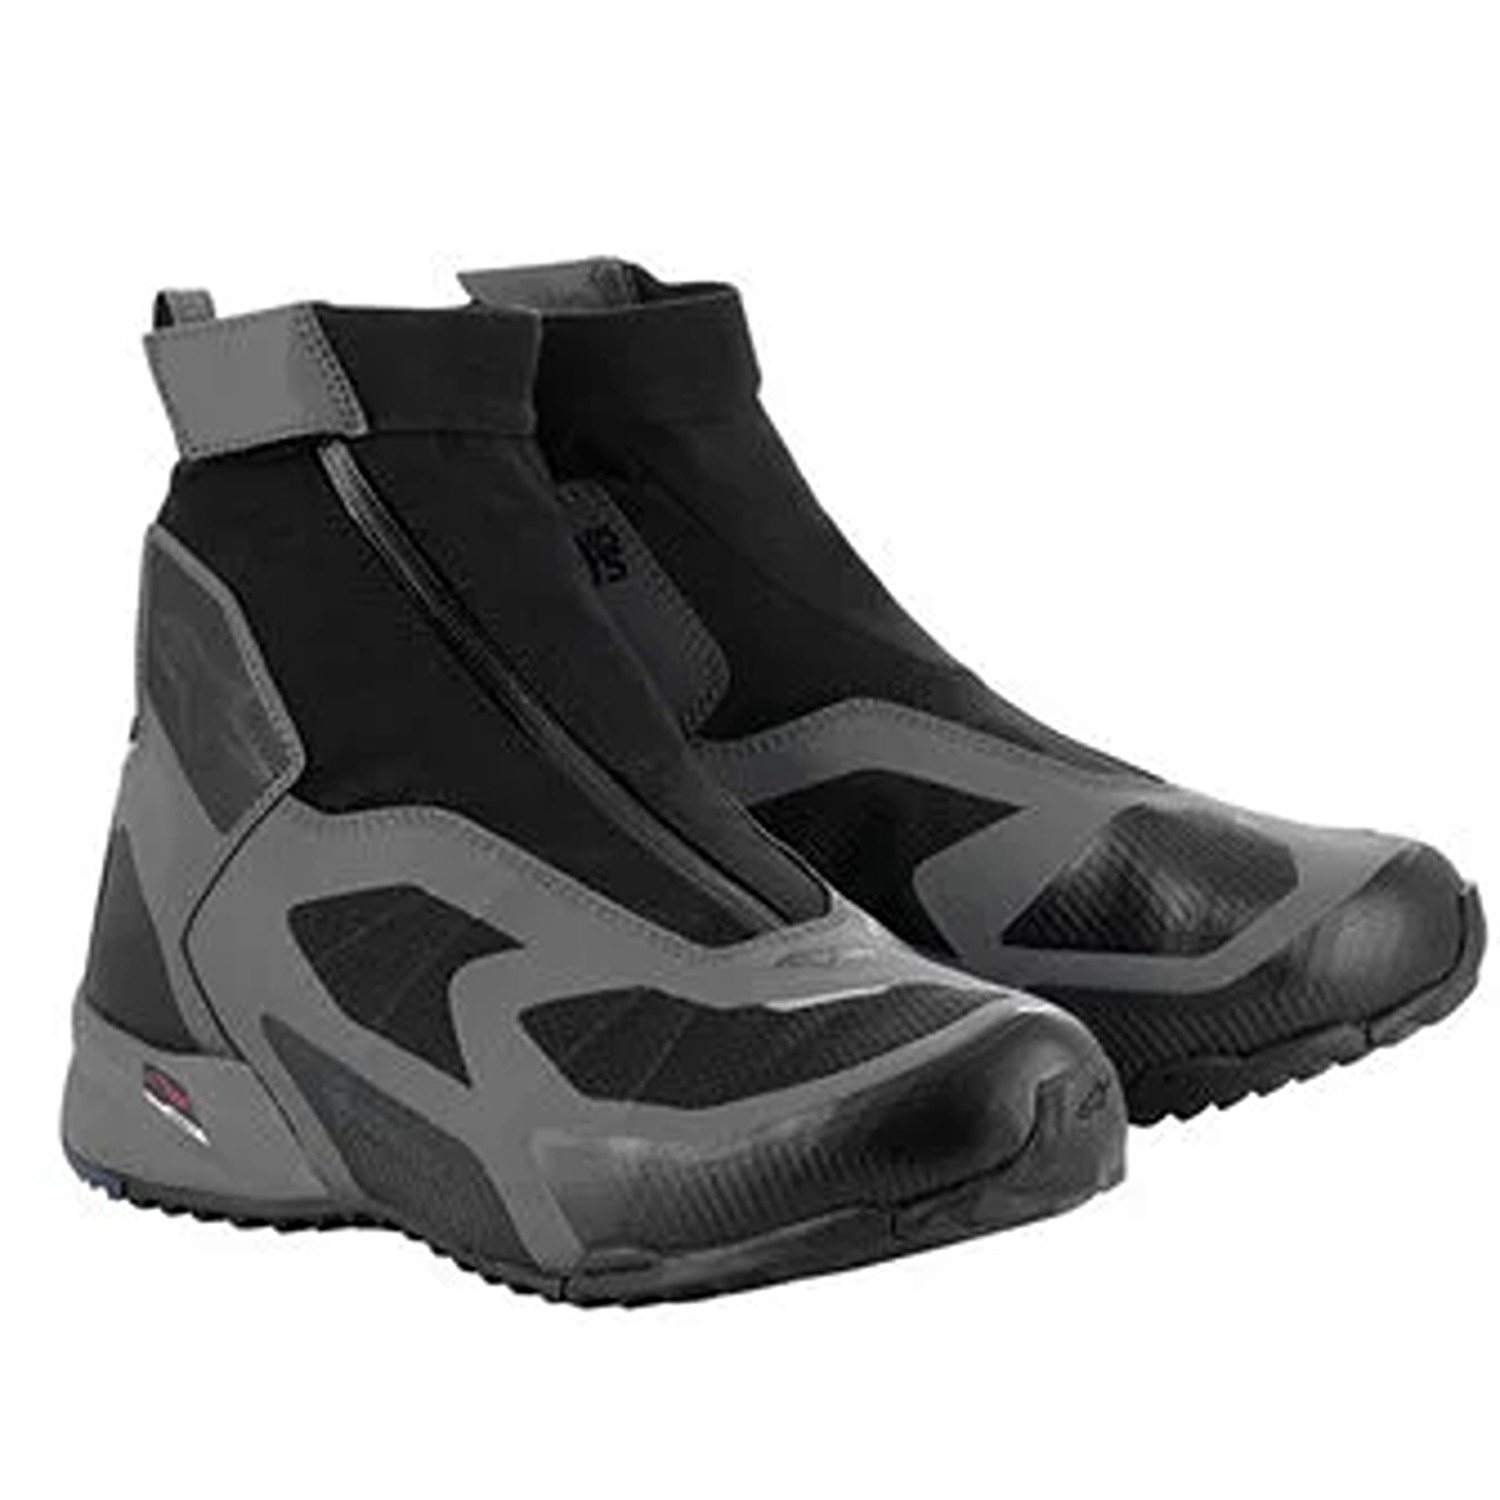 Image of Alpinestars CR-8 Gore-Tex Shoes Black Mid Gray Bright Red Size US 95 ID 8059347260181